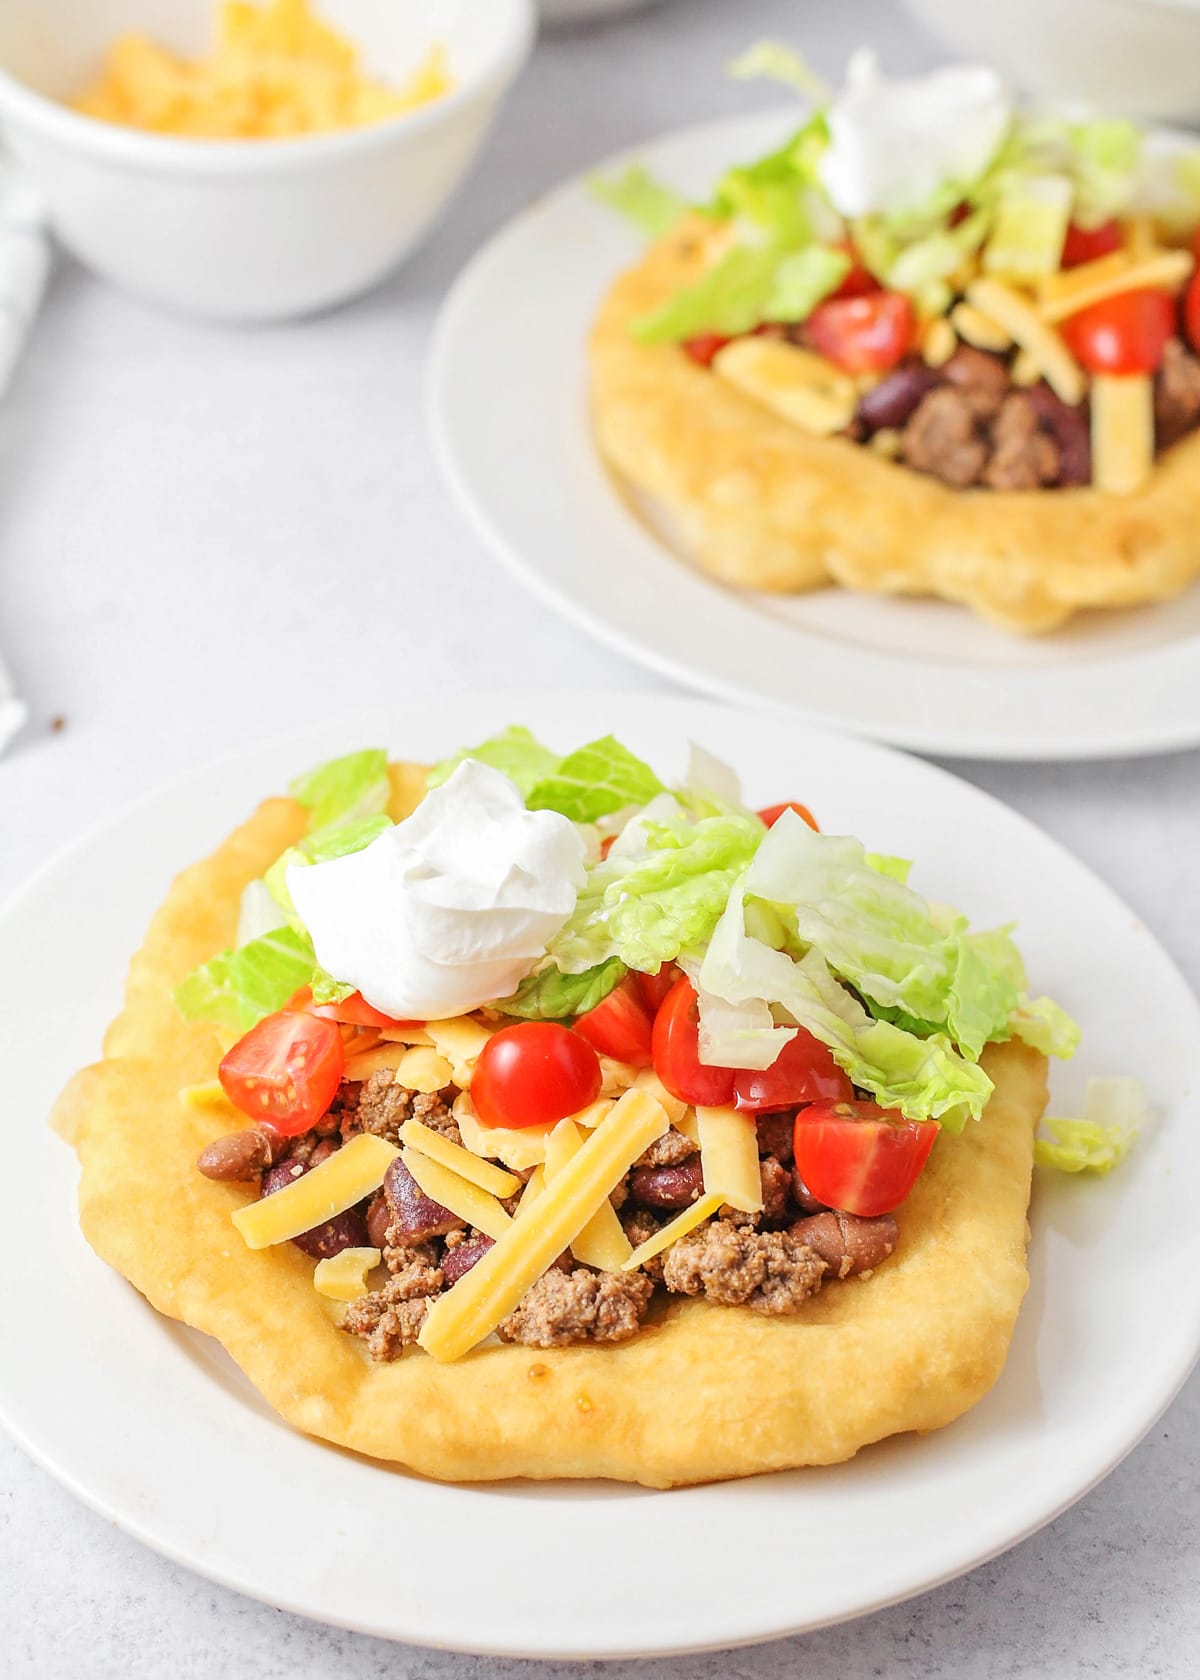 Fry bread served with meat, beans, cheese, lettuce, and sour cream.